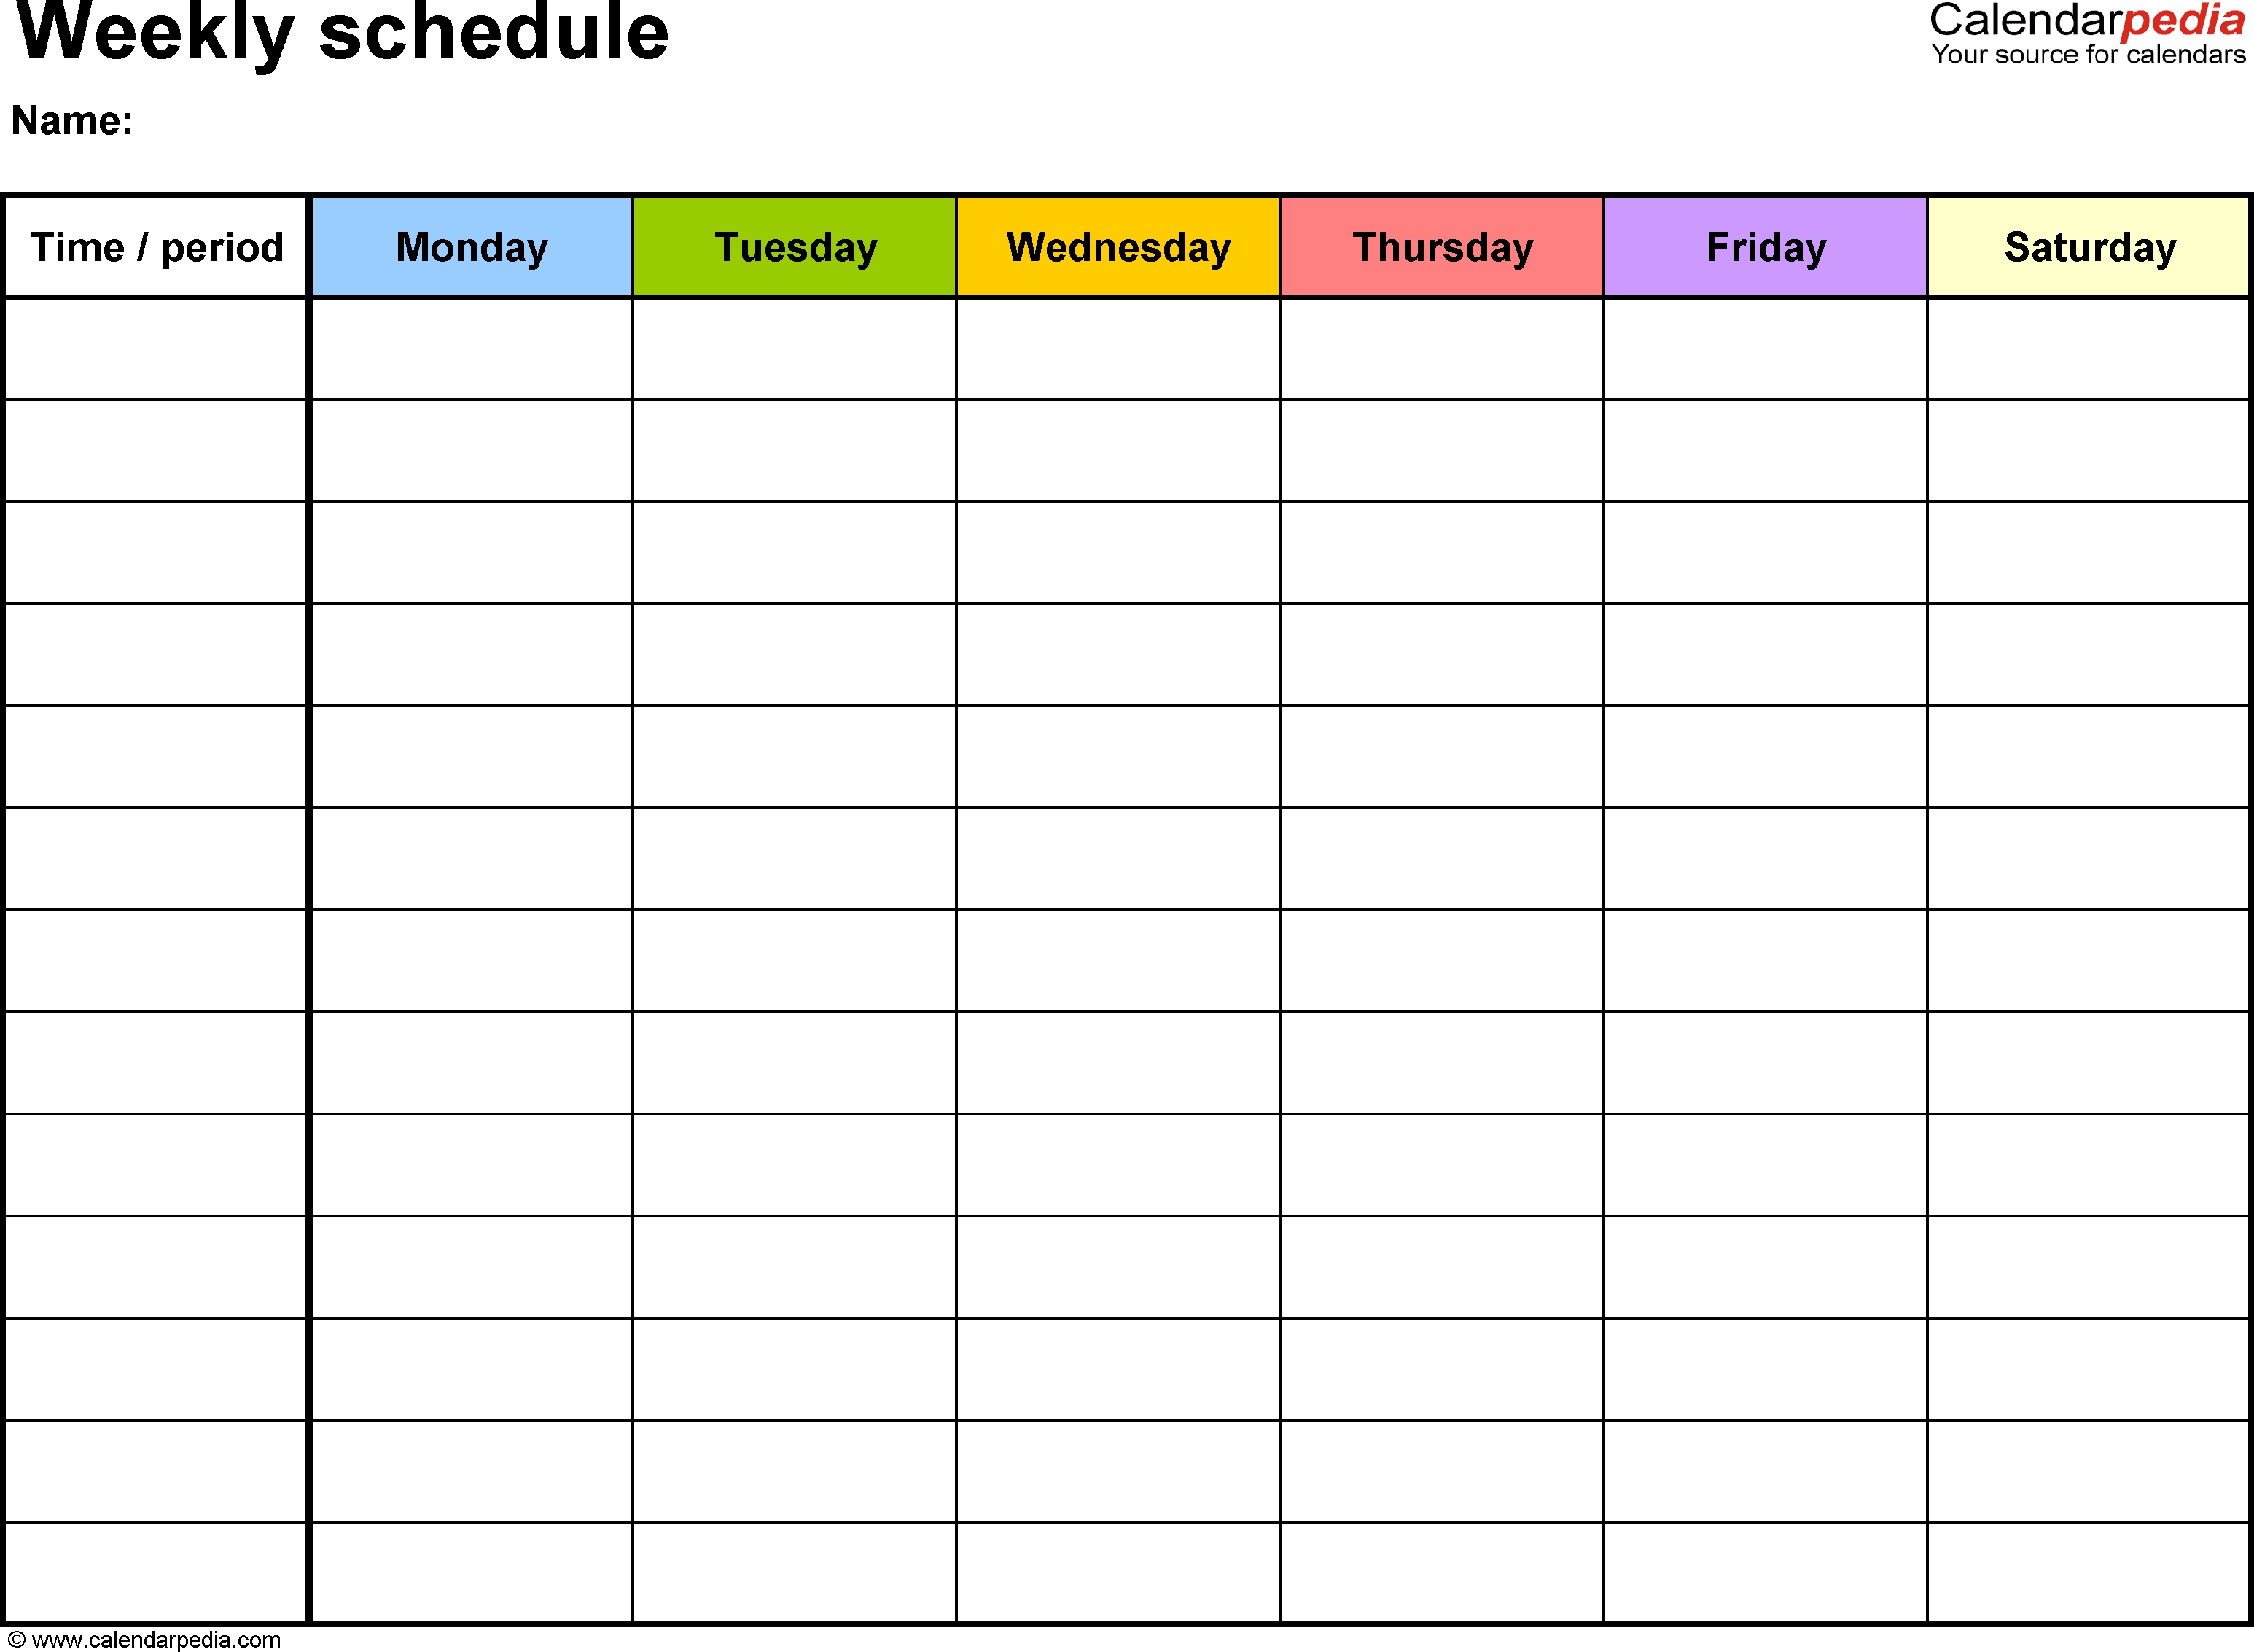 Free Weekly Schedule Templates For Word - 18 Templates for Printable Monday Through Friday Calendar Template